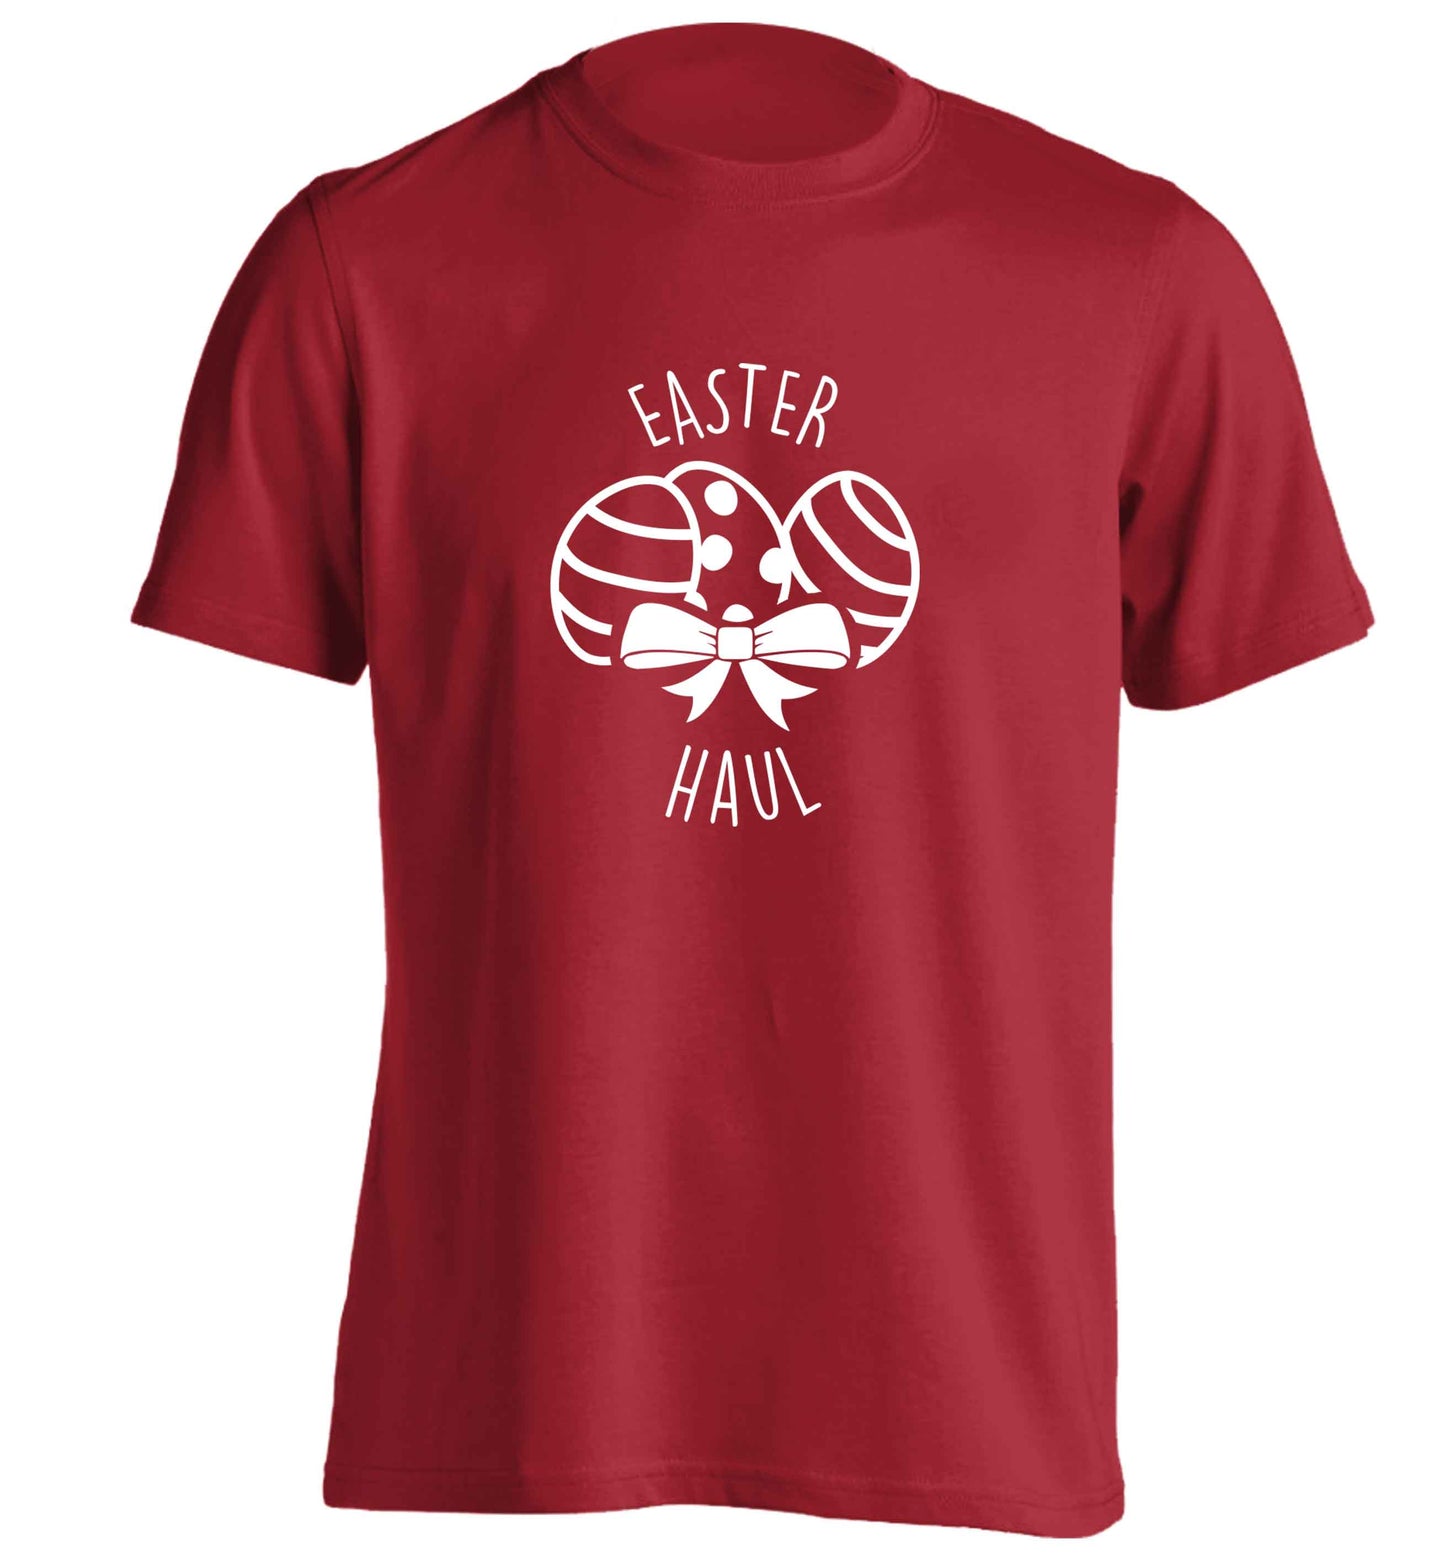 Easter haul adults unisex red Tshirt 2XL